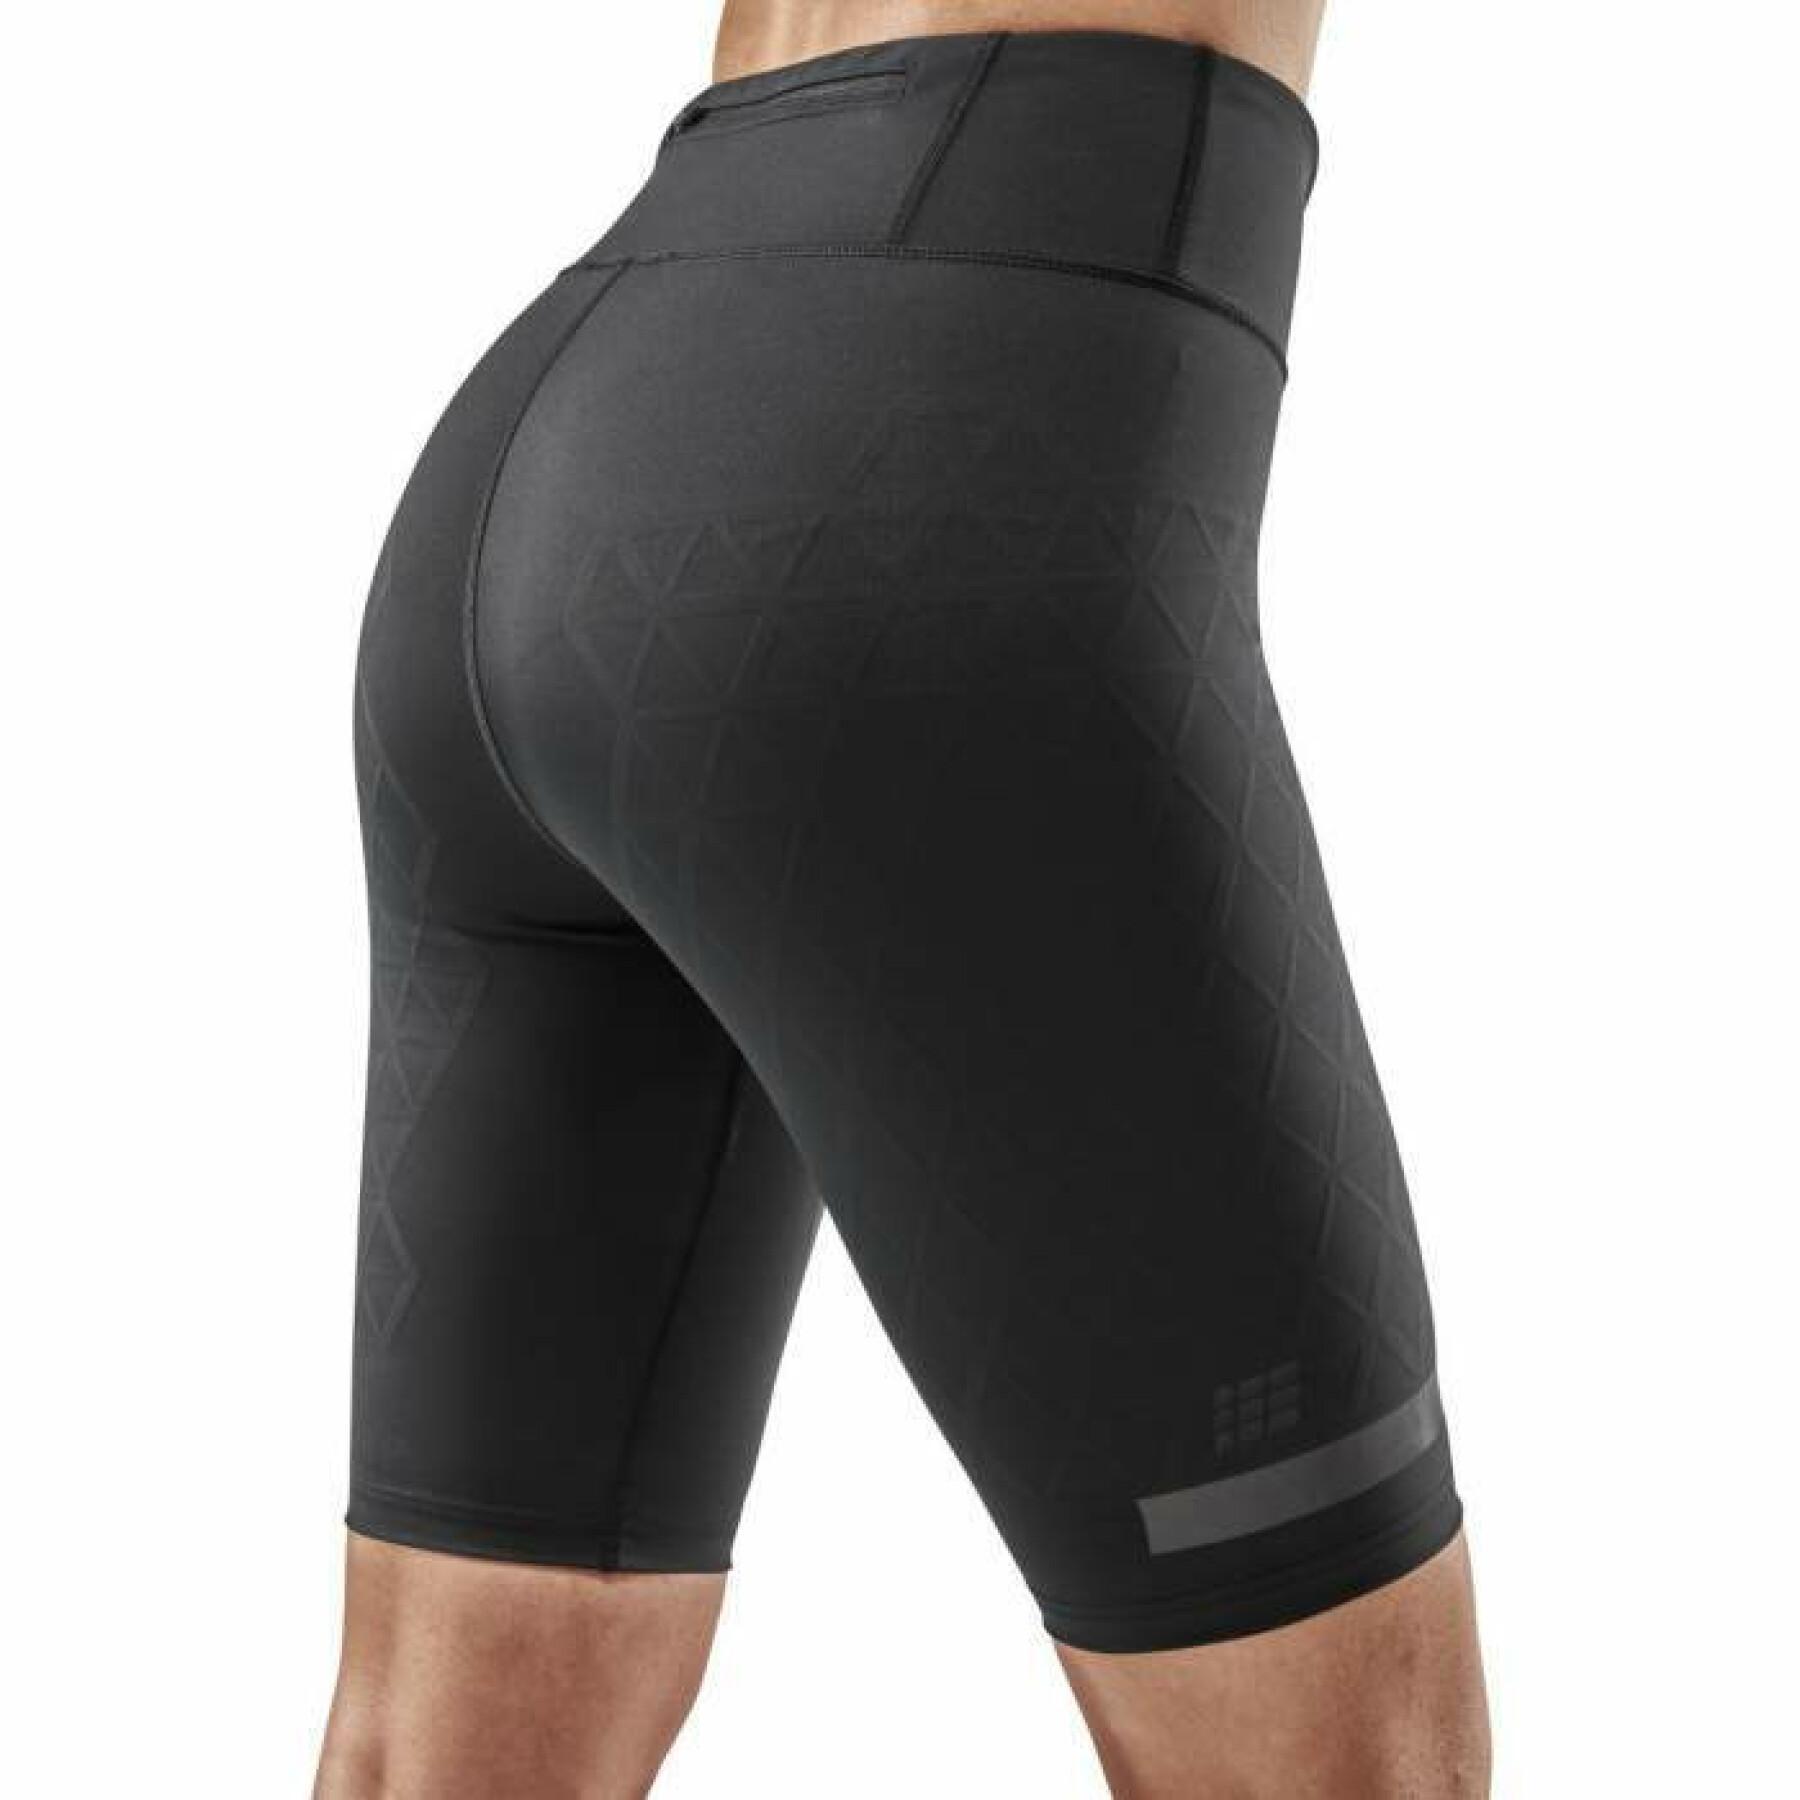 Women's thigh-high boots CEP Compression The run